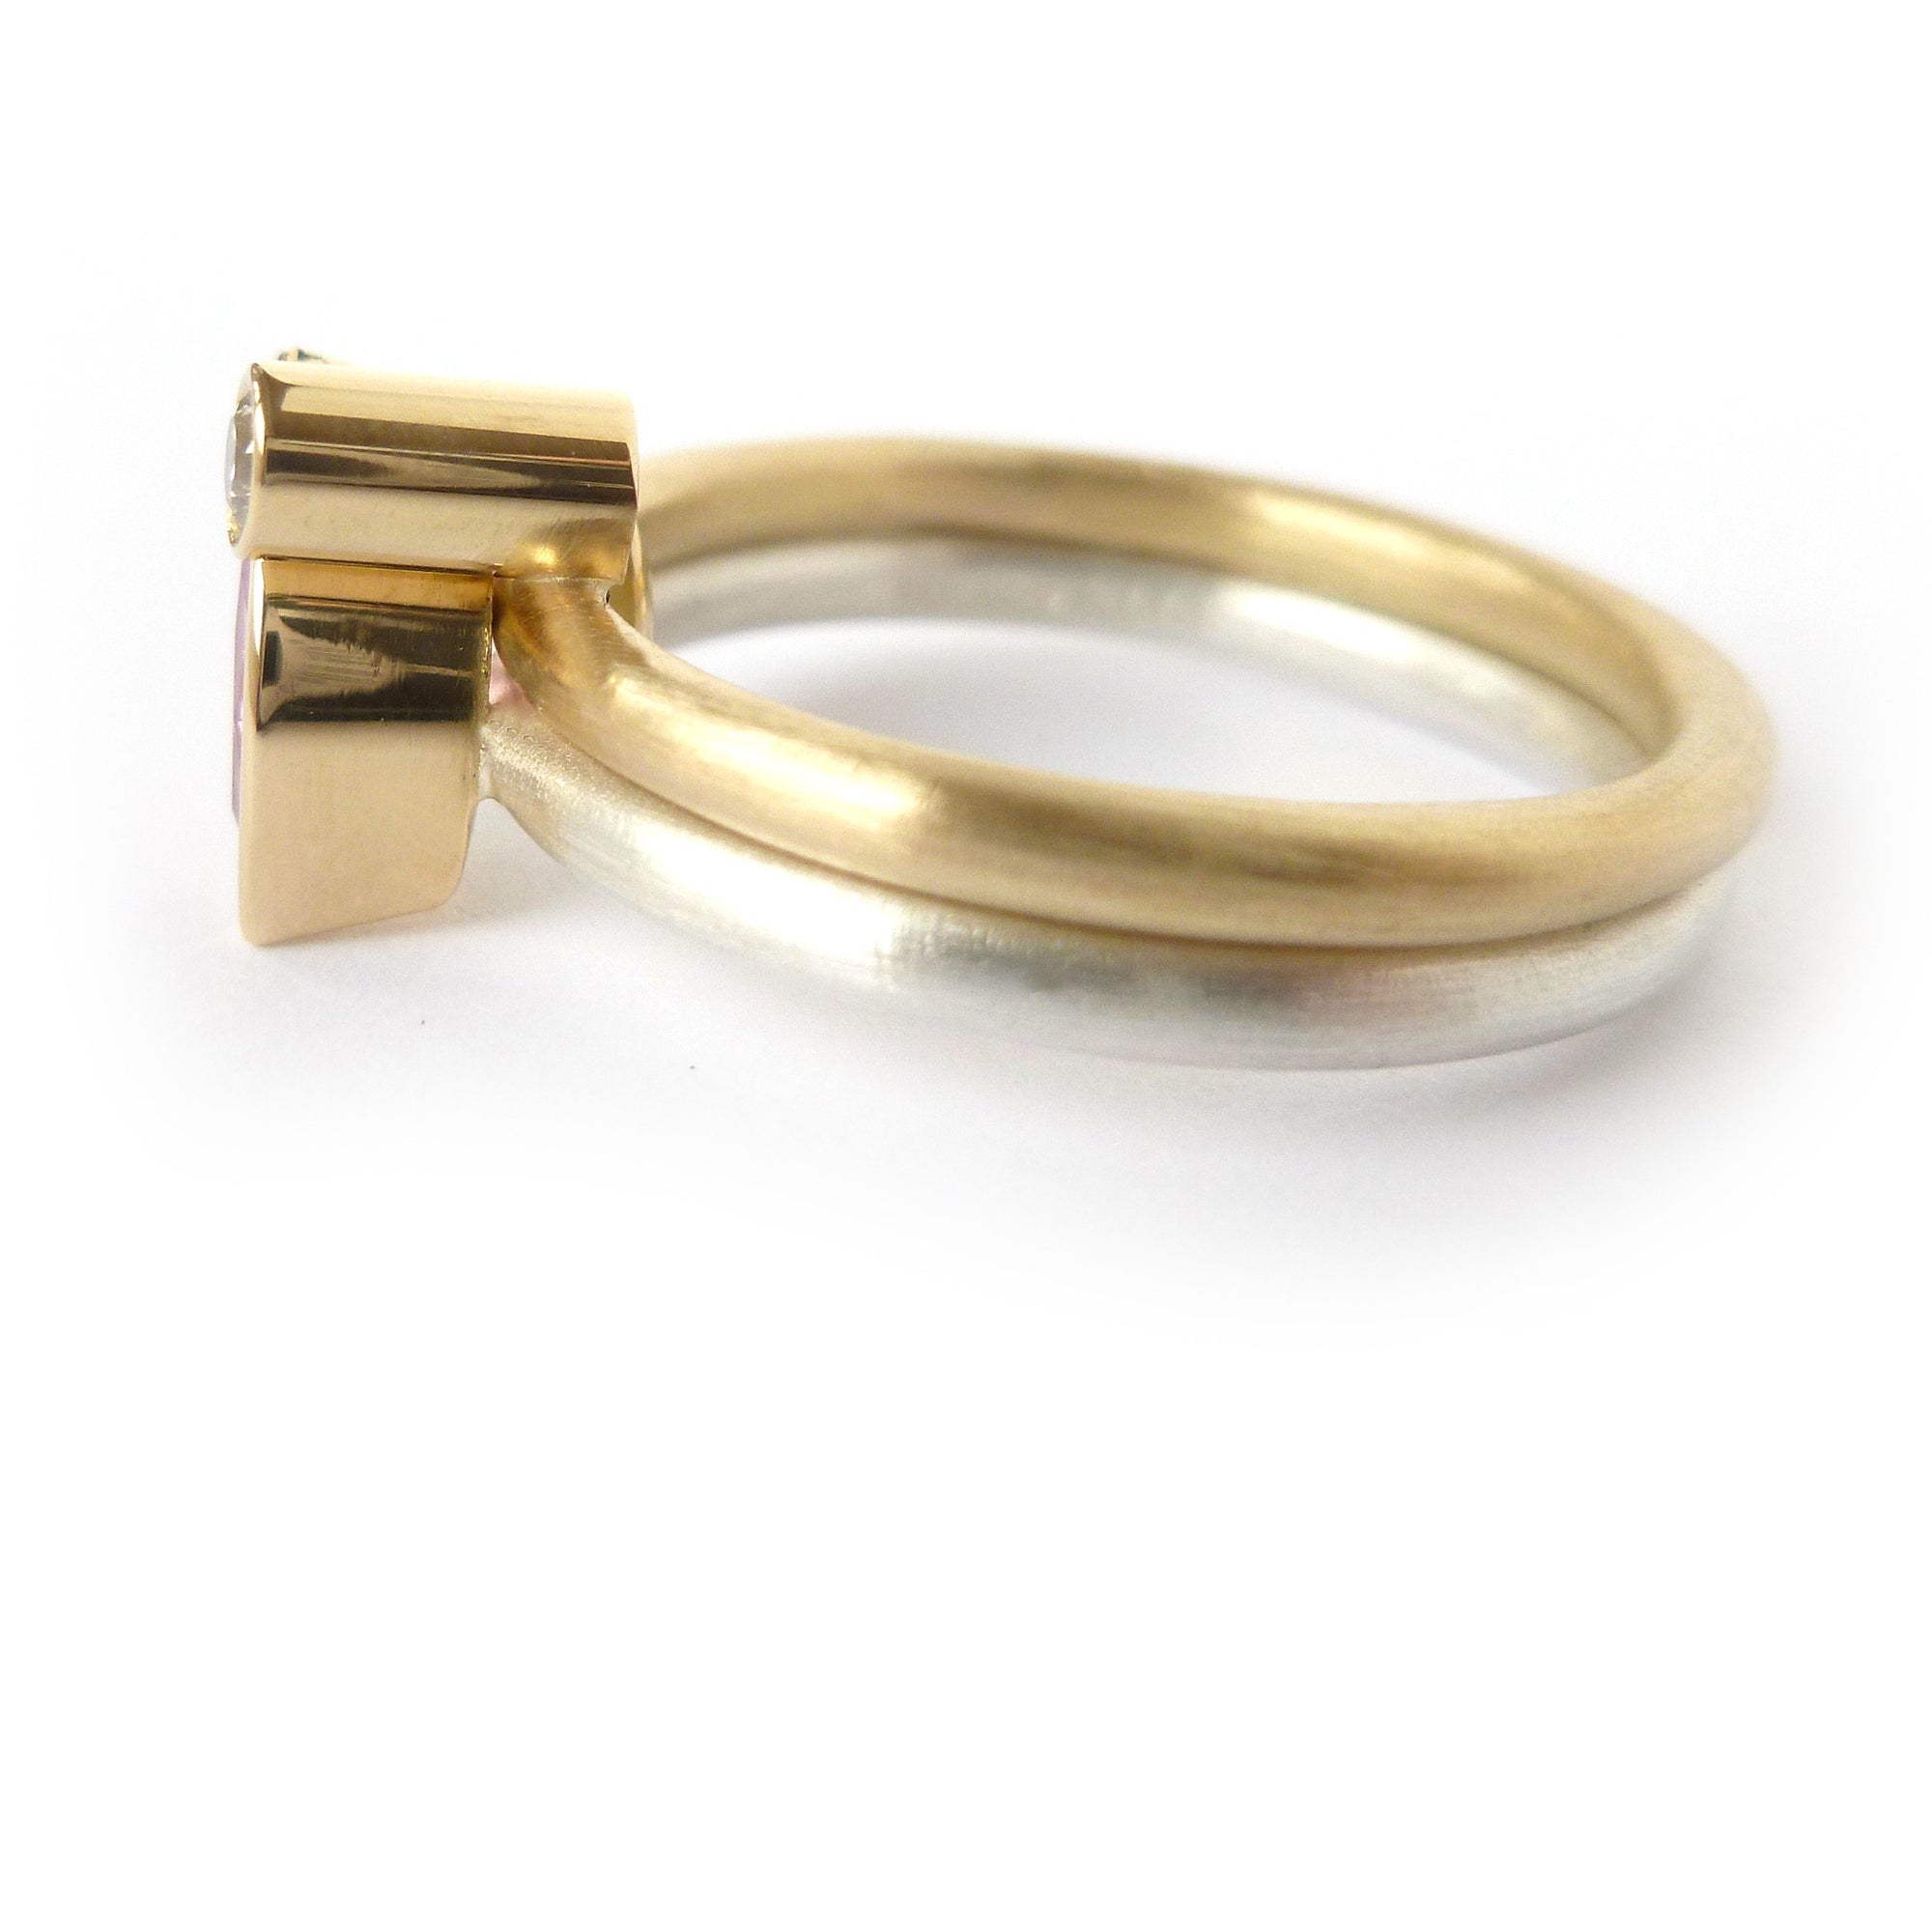 linked wedding ring and engagement ring by Sue Lane Contemporary Jewellery